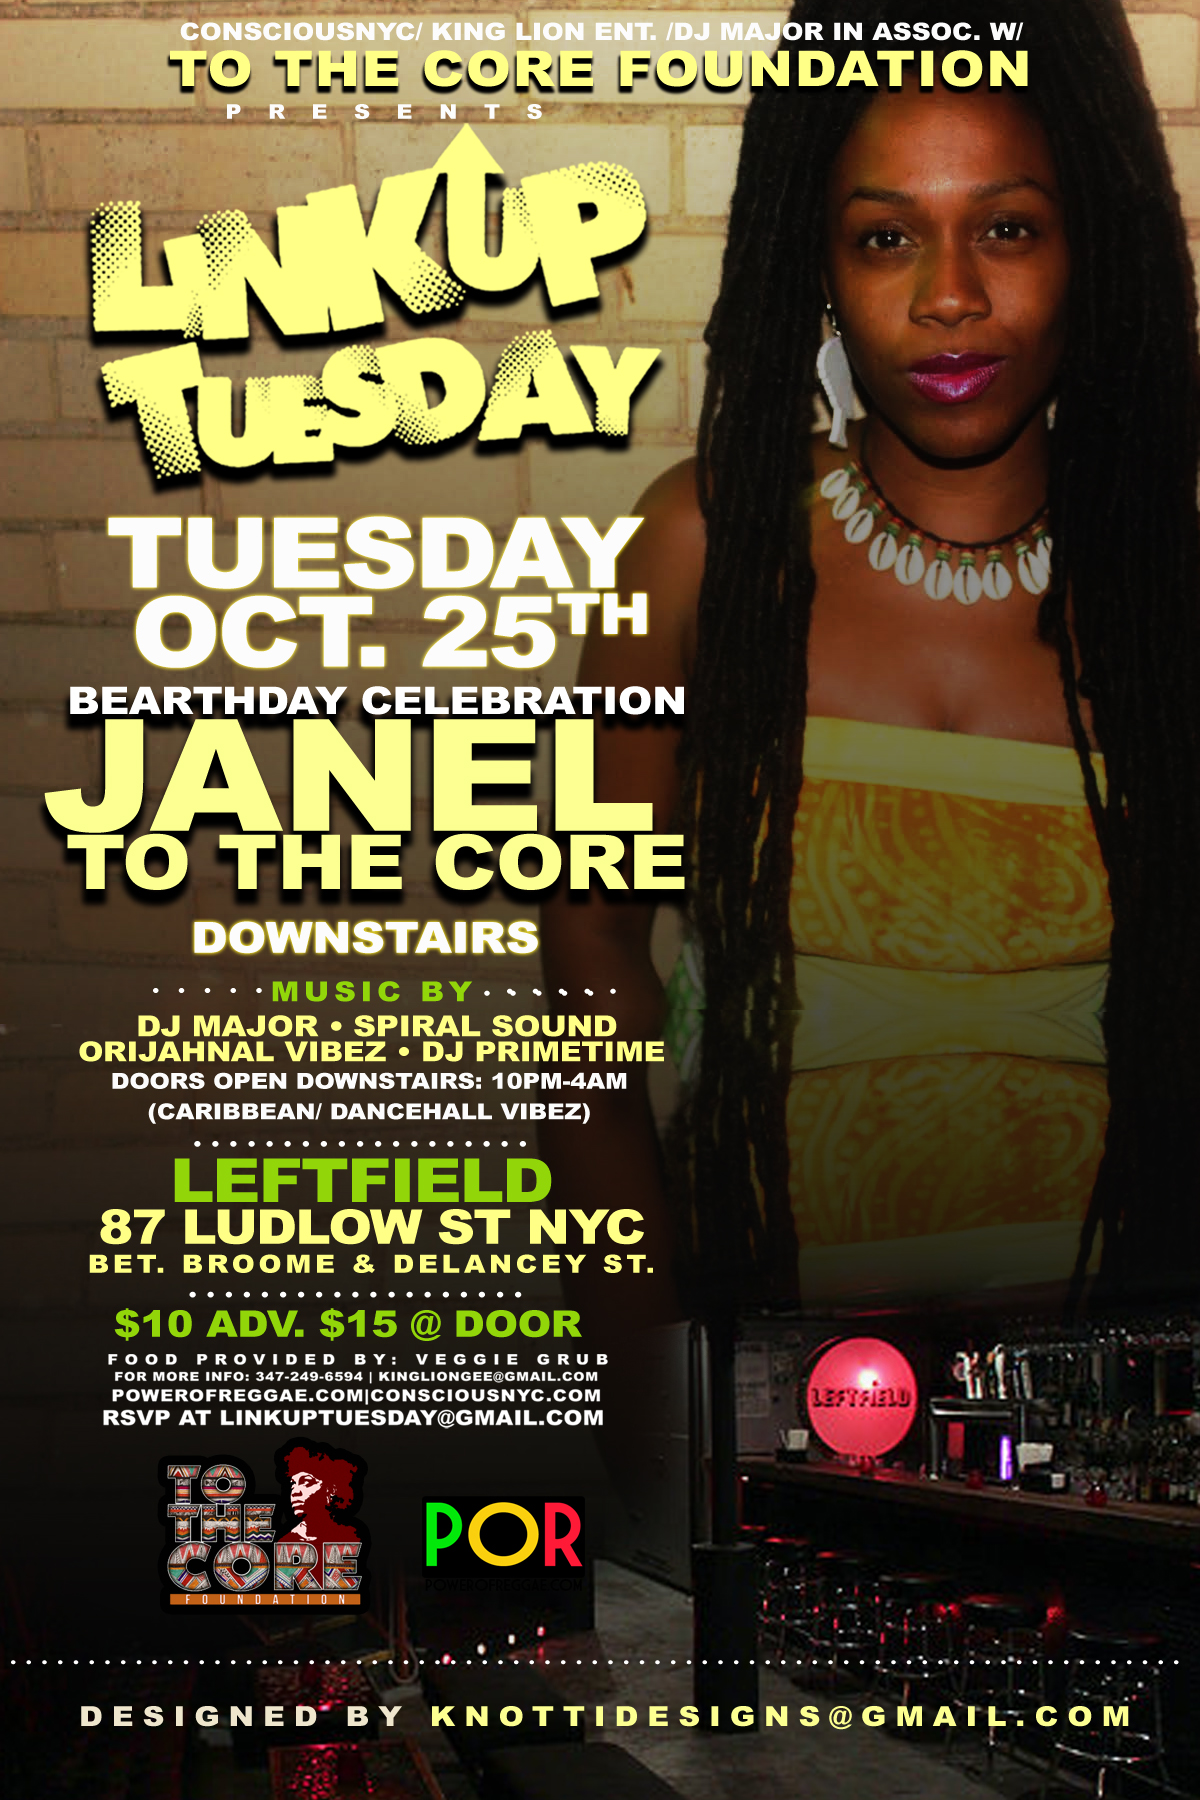 LINK UP TUESDAY- 10/25- JANEL TO THE CORE